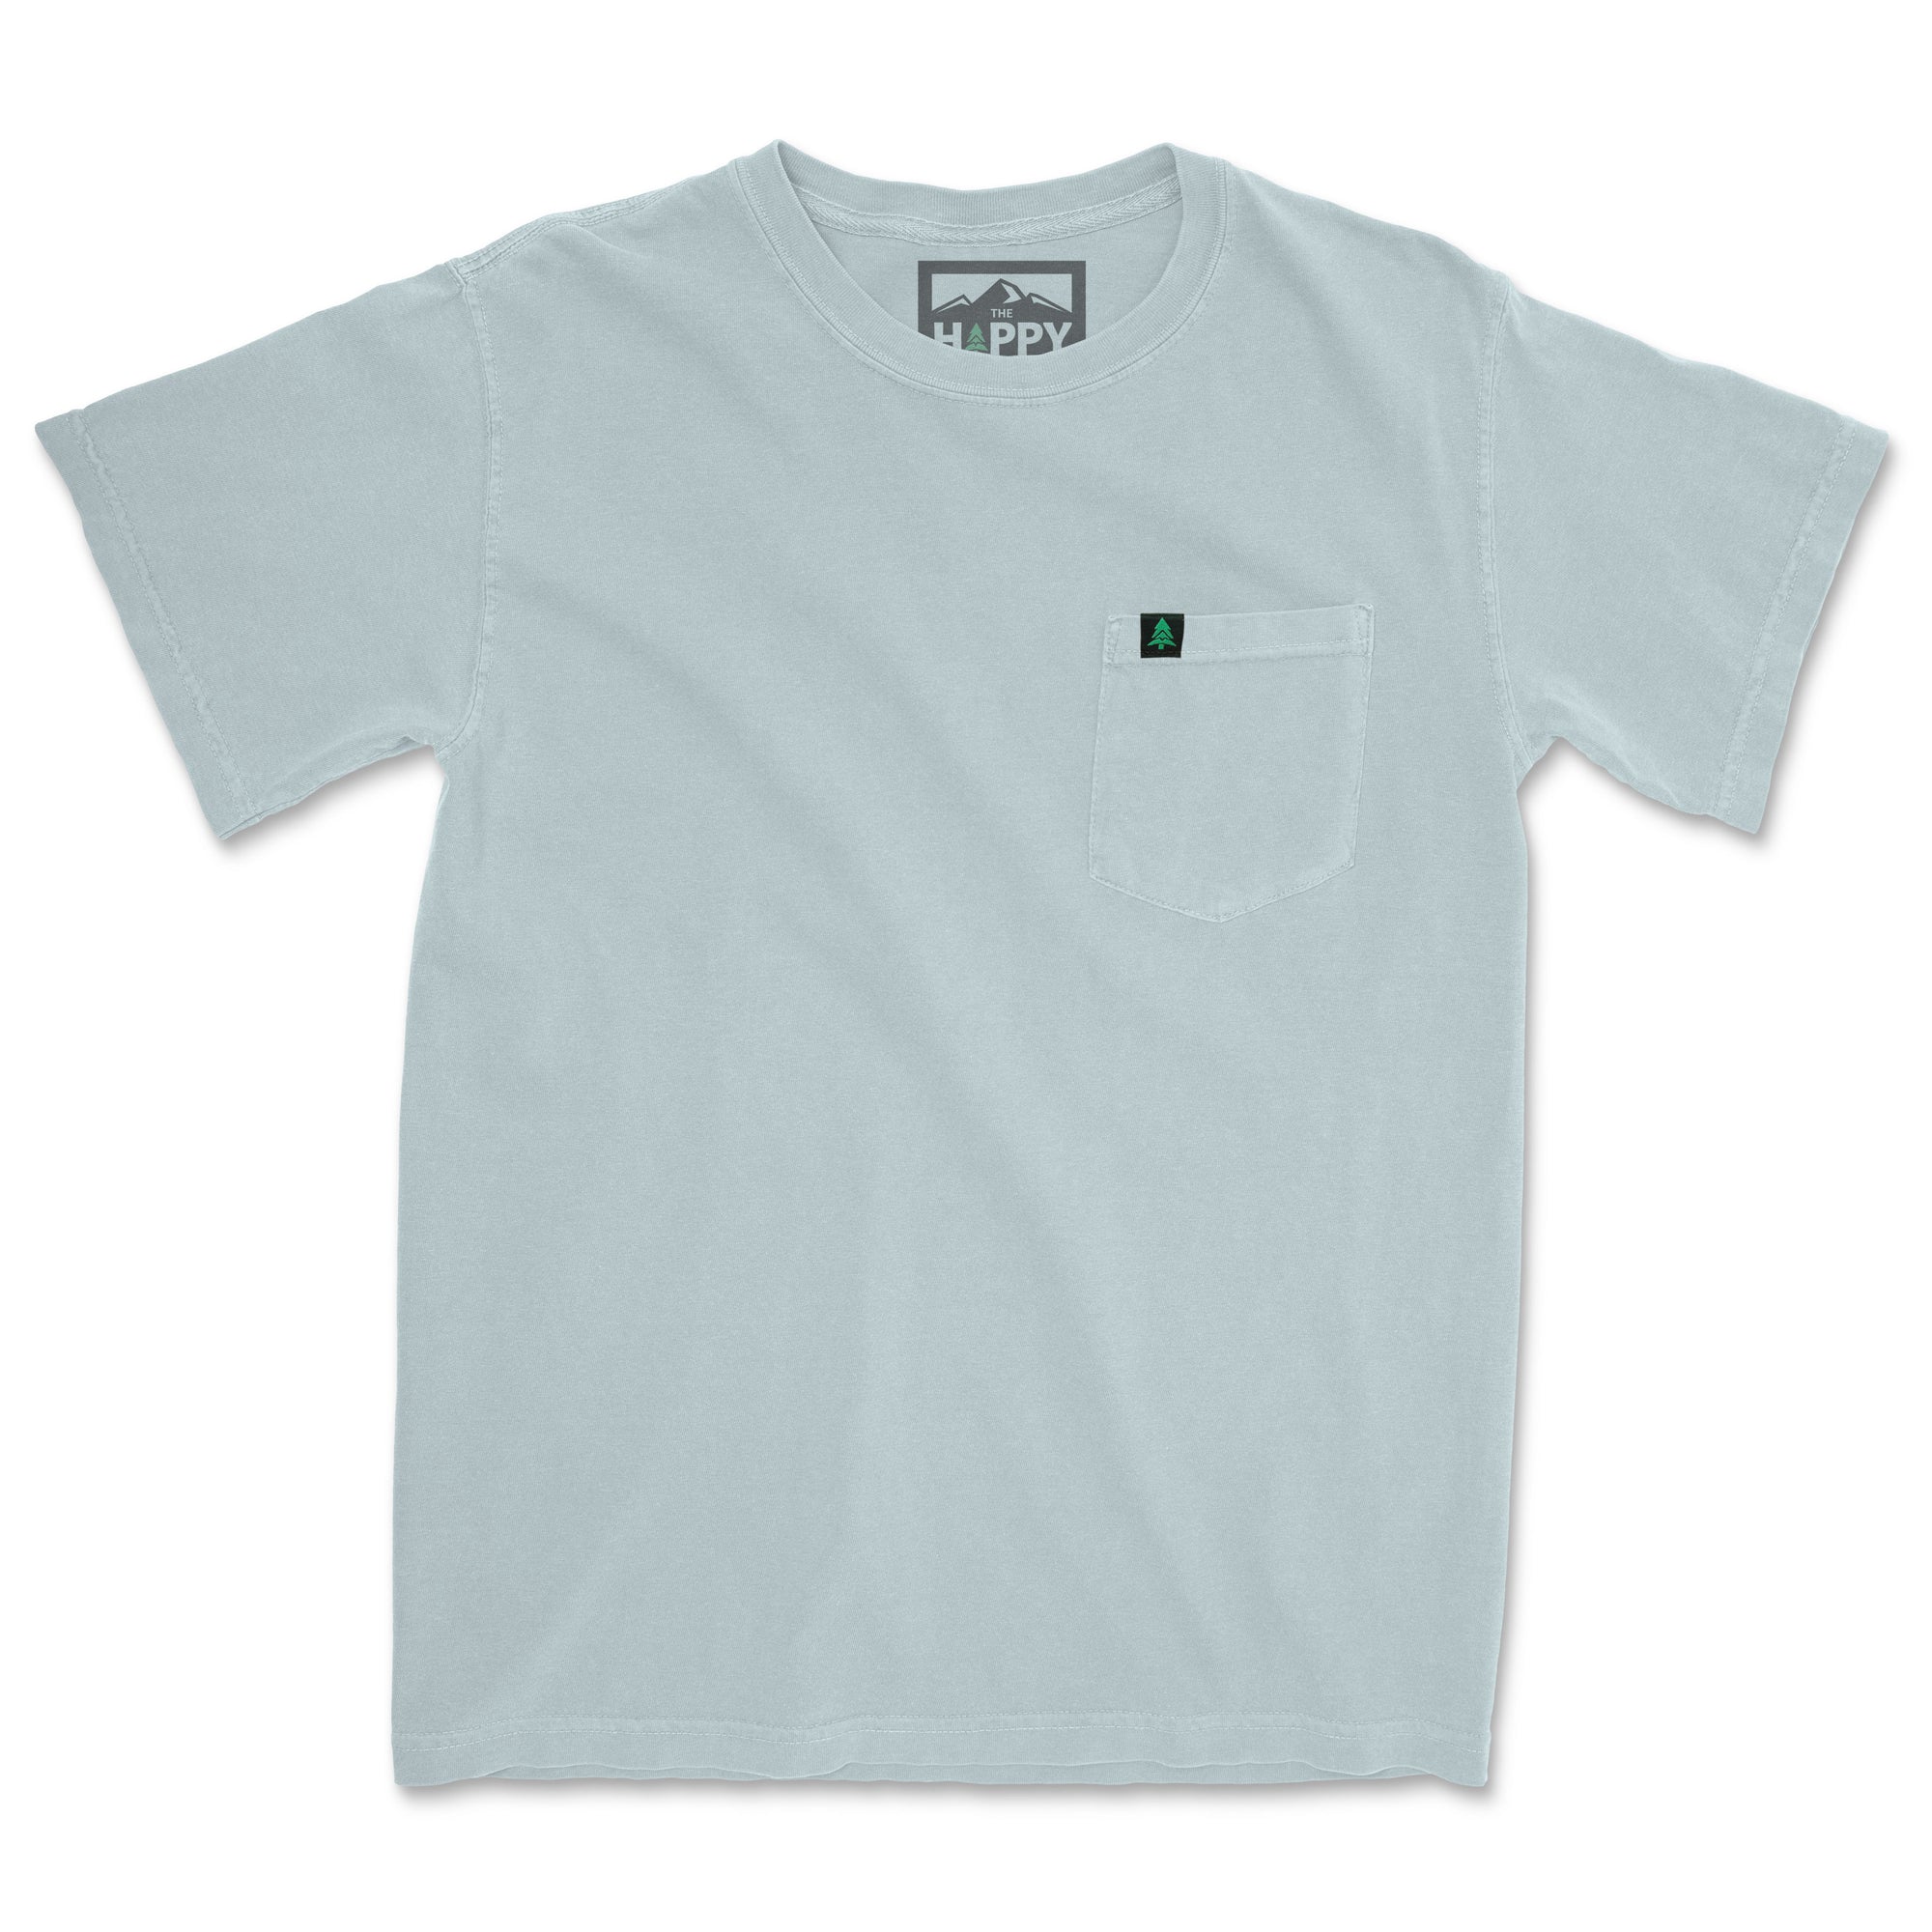 Into The Wild I Go Surf and Summits Edition Pigment-Dyed Pocket Tee